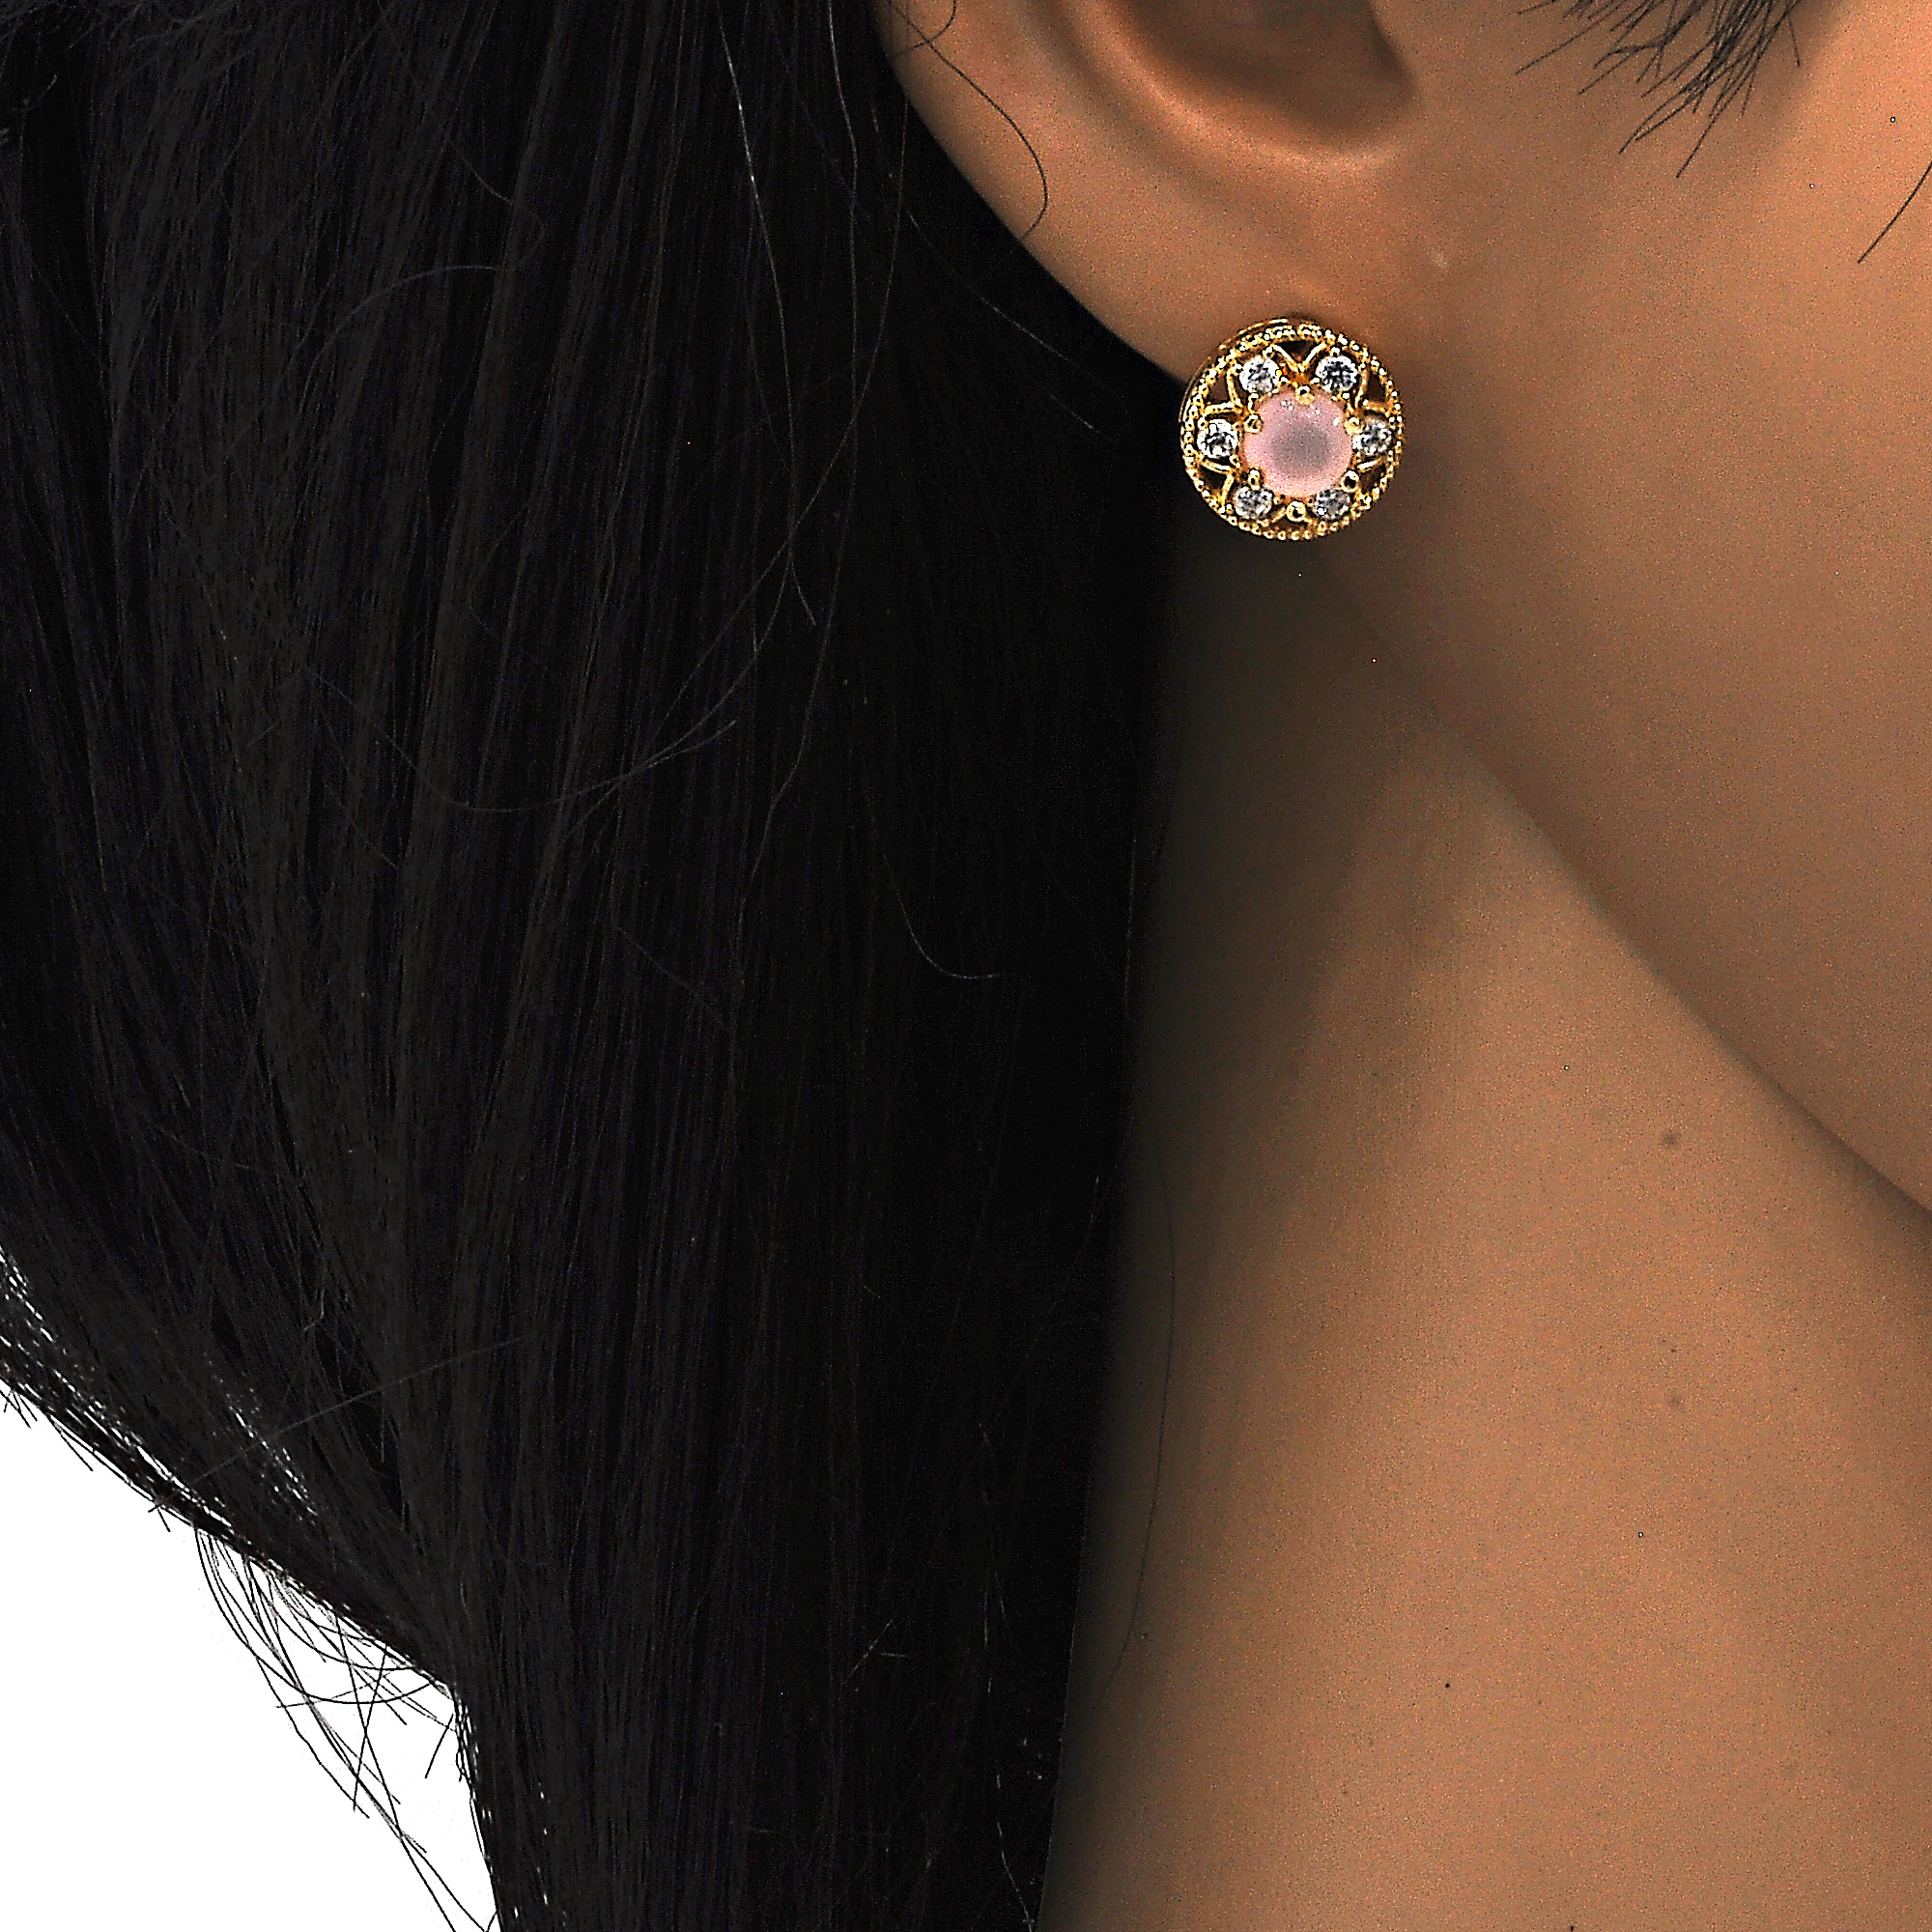 Gold Filled High Polish Finsh Stud Earring, Flower Design, With Opal And Cubic Zirconia, Golden Tone